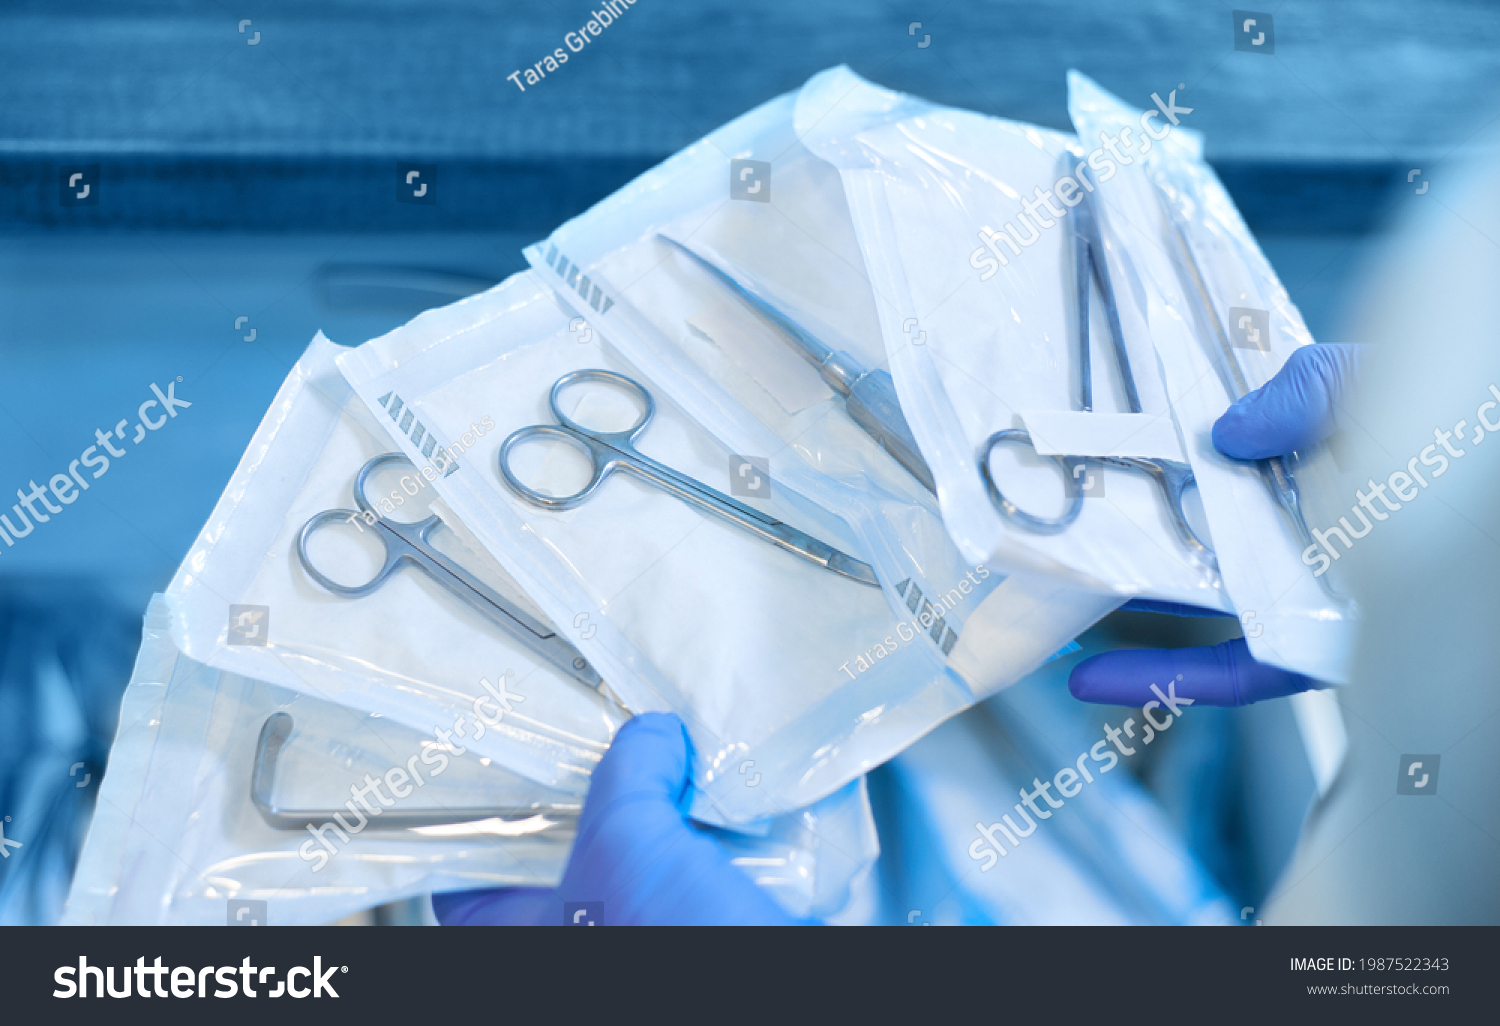 Packaged dental products in sealed sealed packaging. The concept of sterilization and disinfection in a modern dental clinic. #1987522343